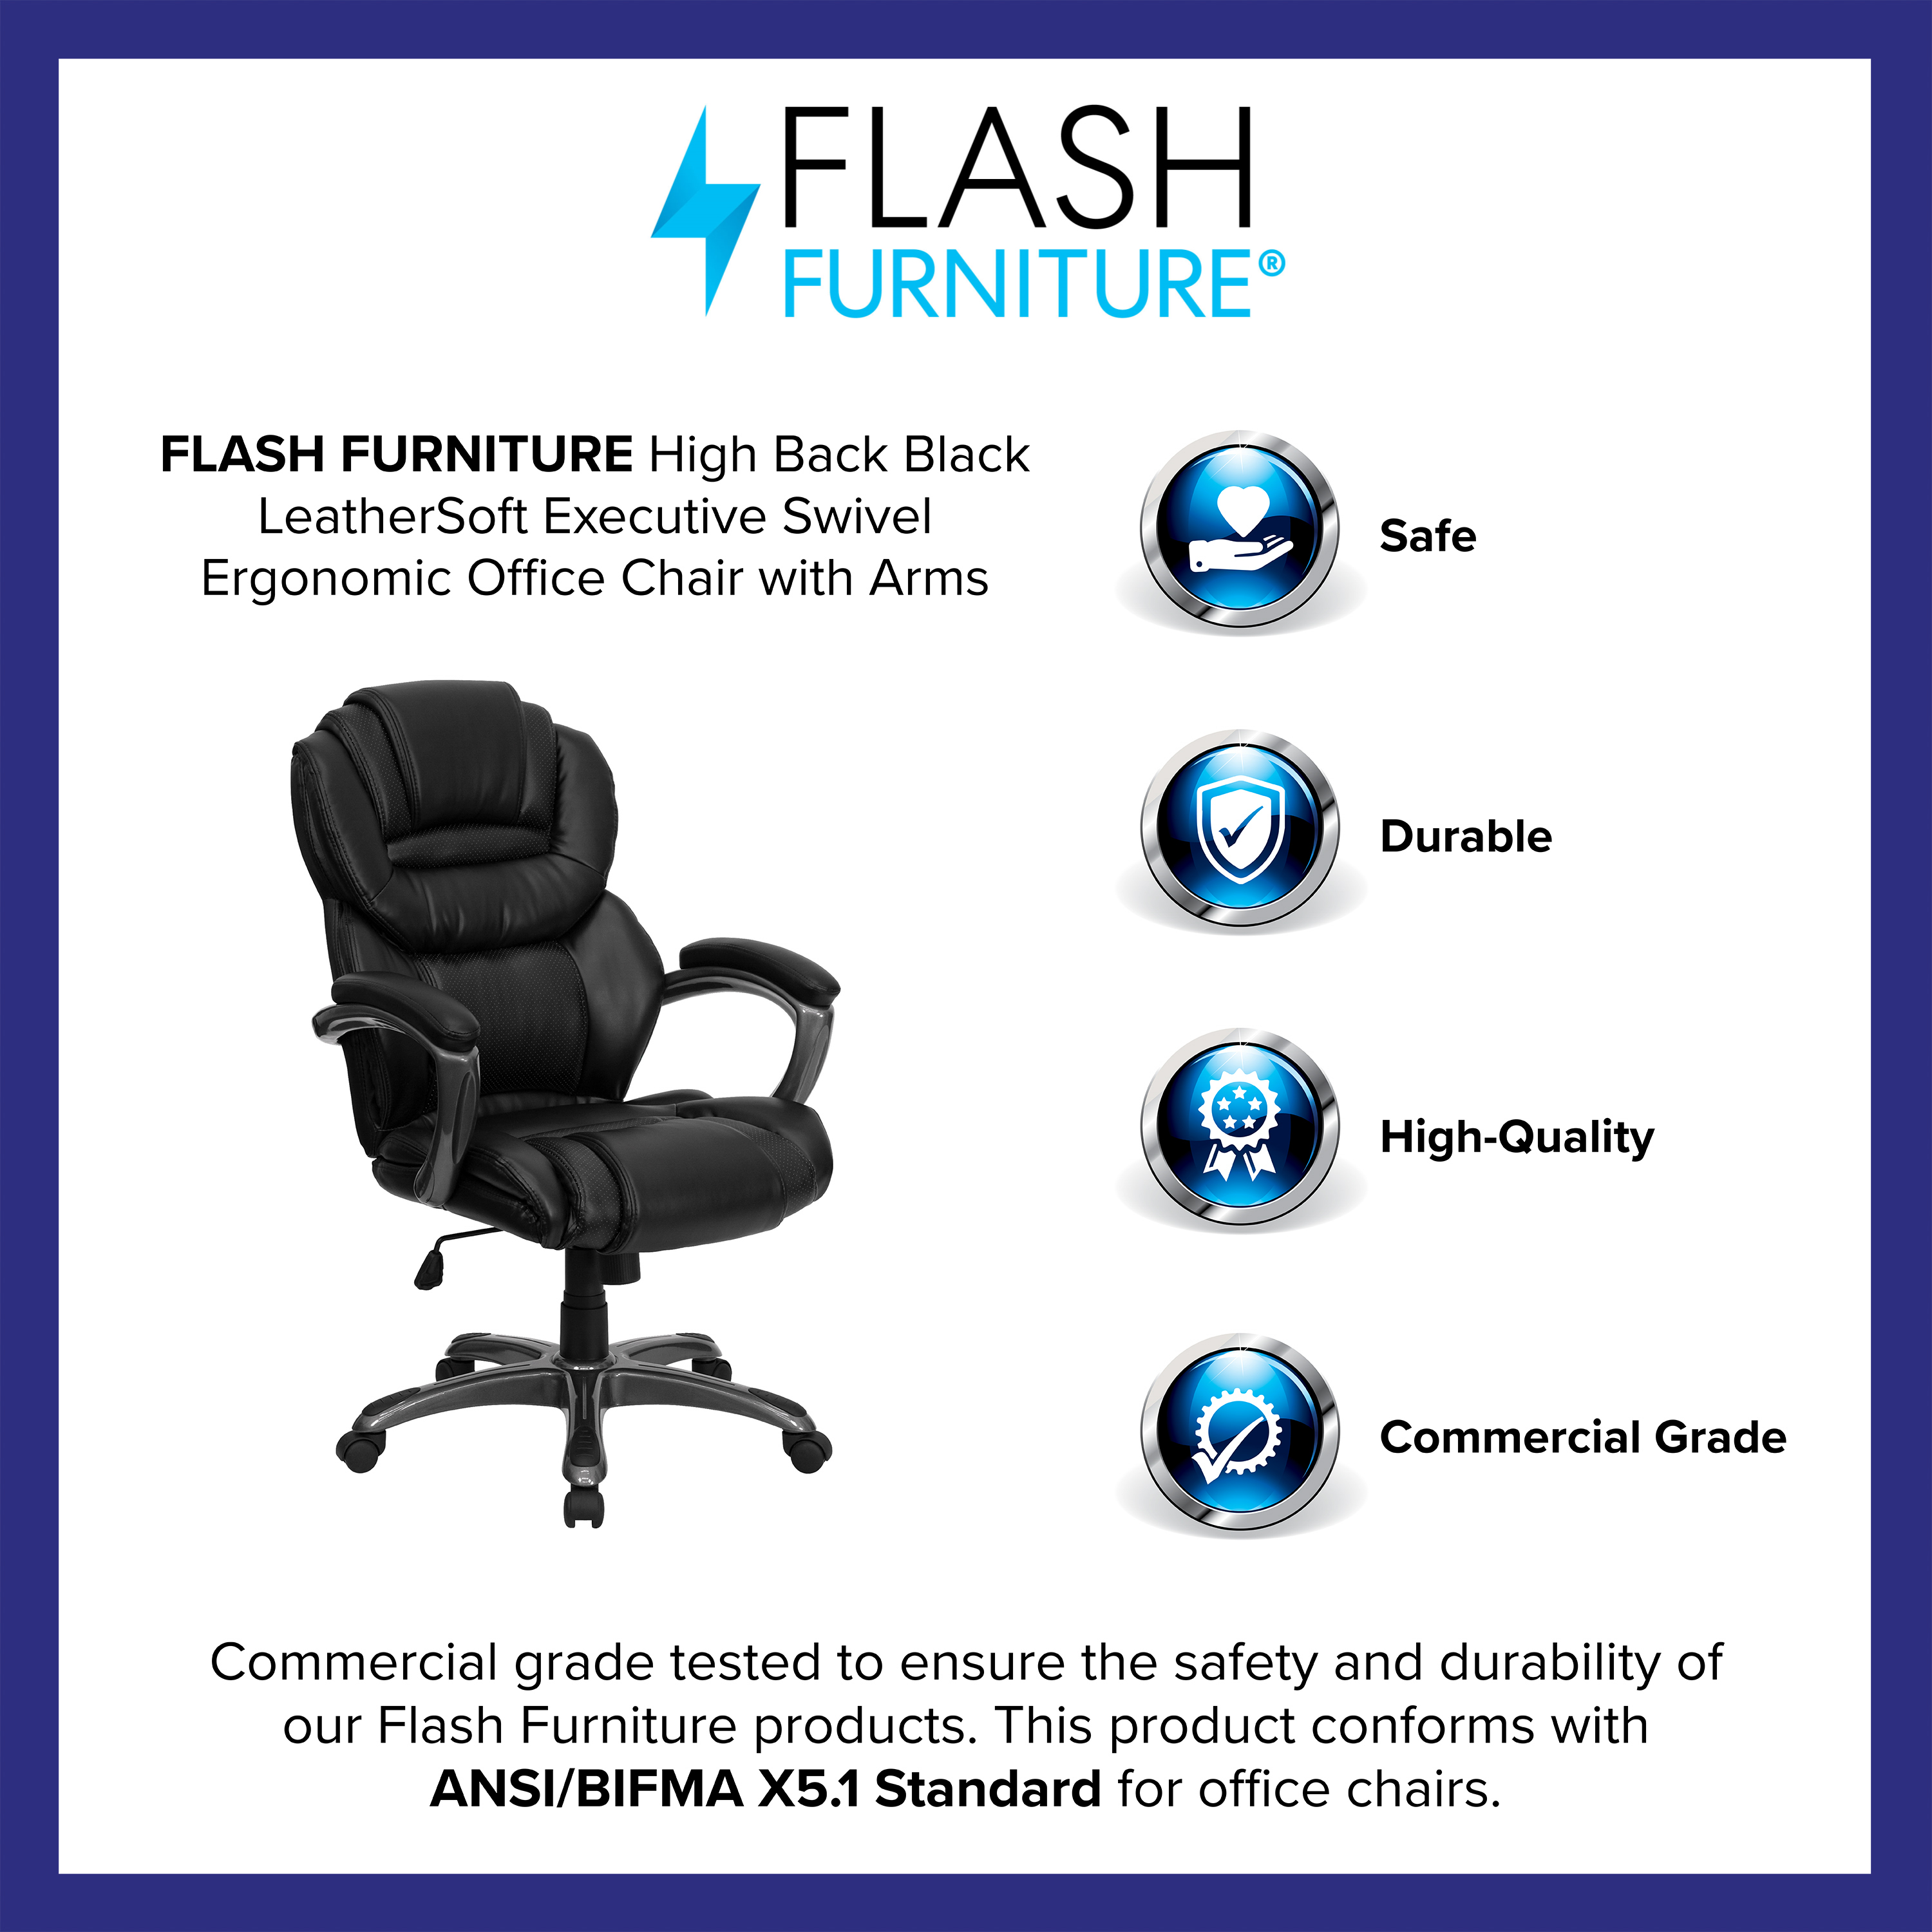 Flash Furniture High Back Black LeatherSoft Executive Swivel Ergonomic Office Chair with Arms - image 4 of 12